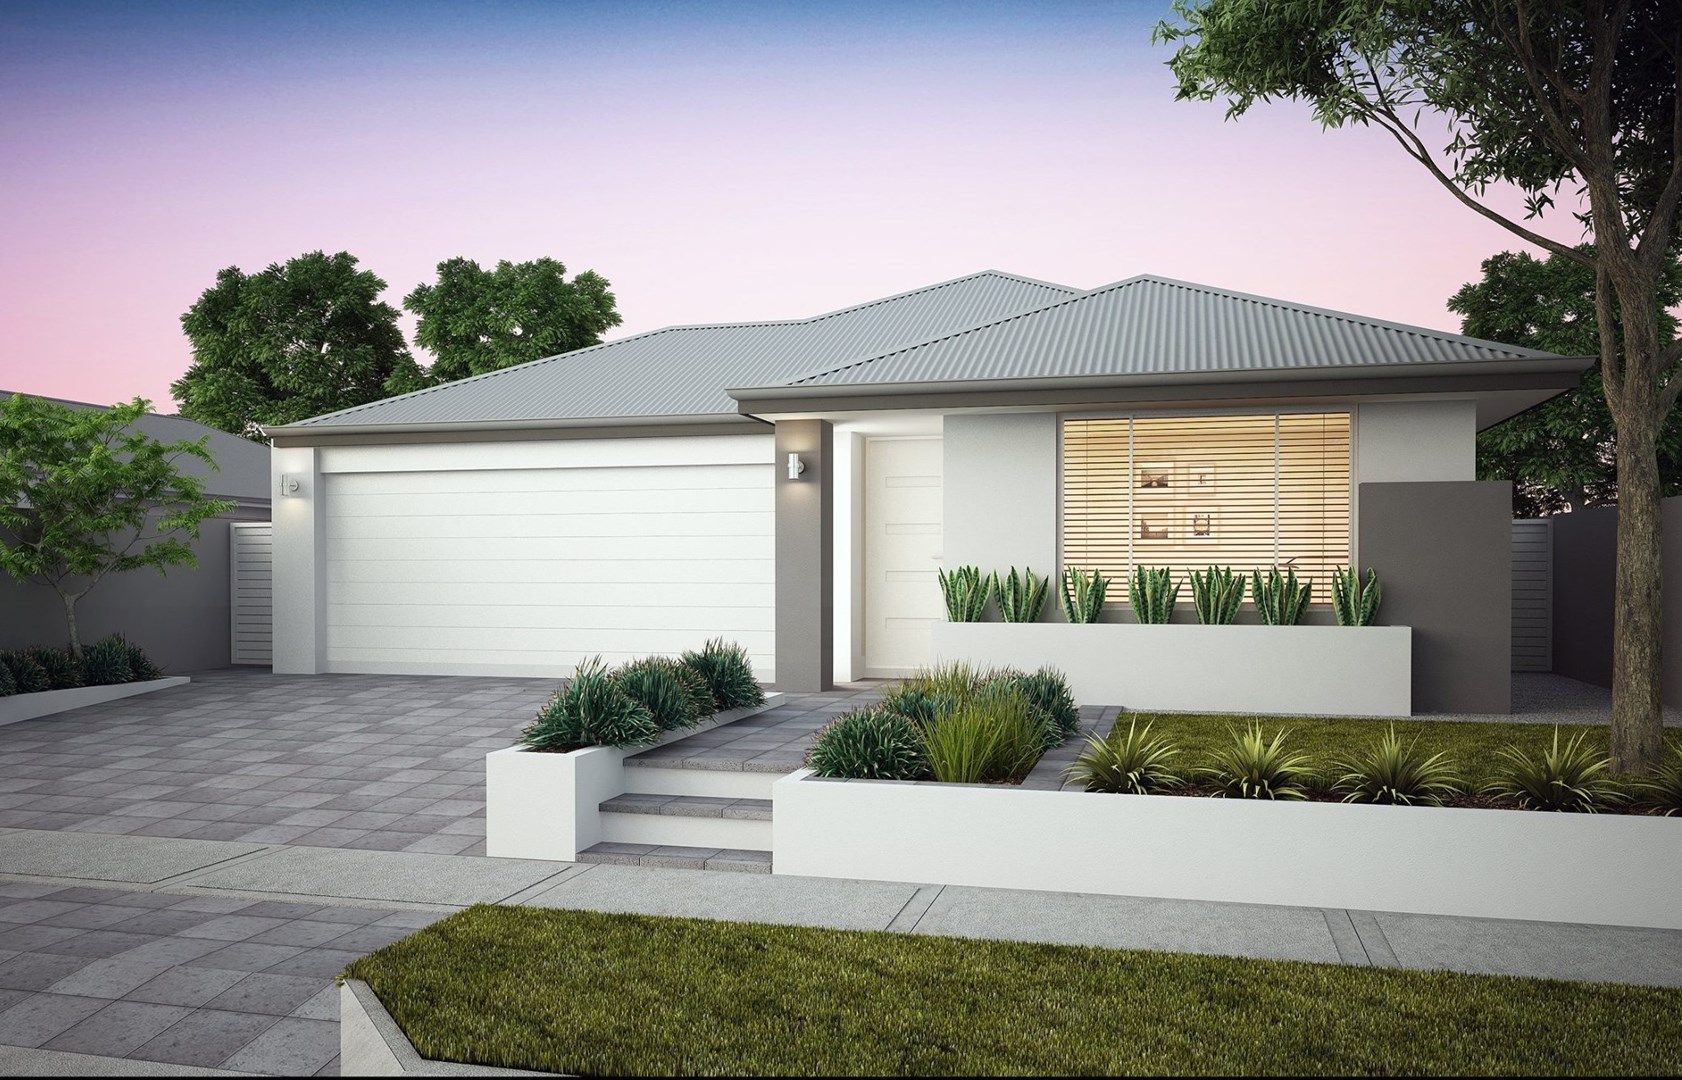 3 bedrooms New House & Land in Digby St GOSNELLS WA, 6110